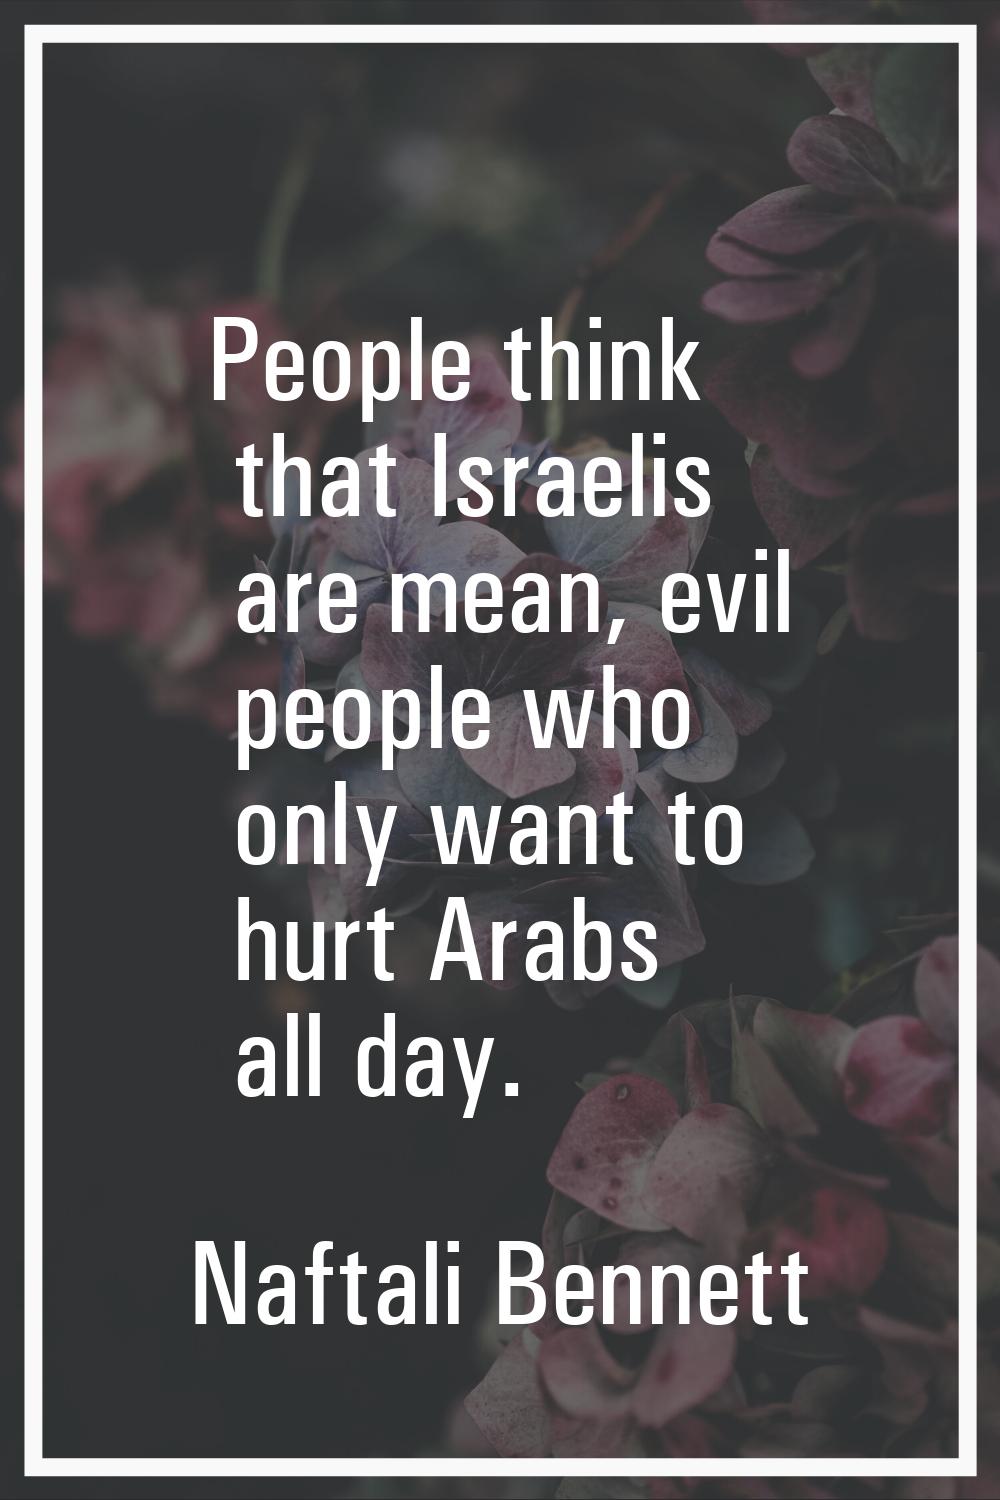 People think that Israelis are mean, evil people who only want to hurt Arabs all day.